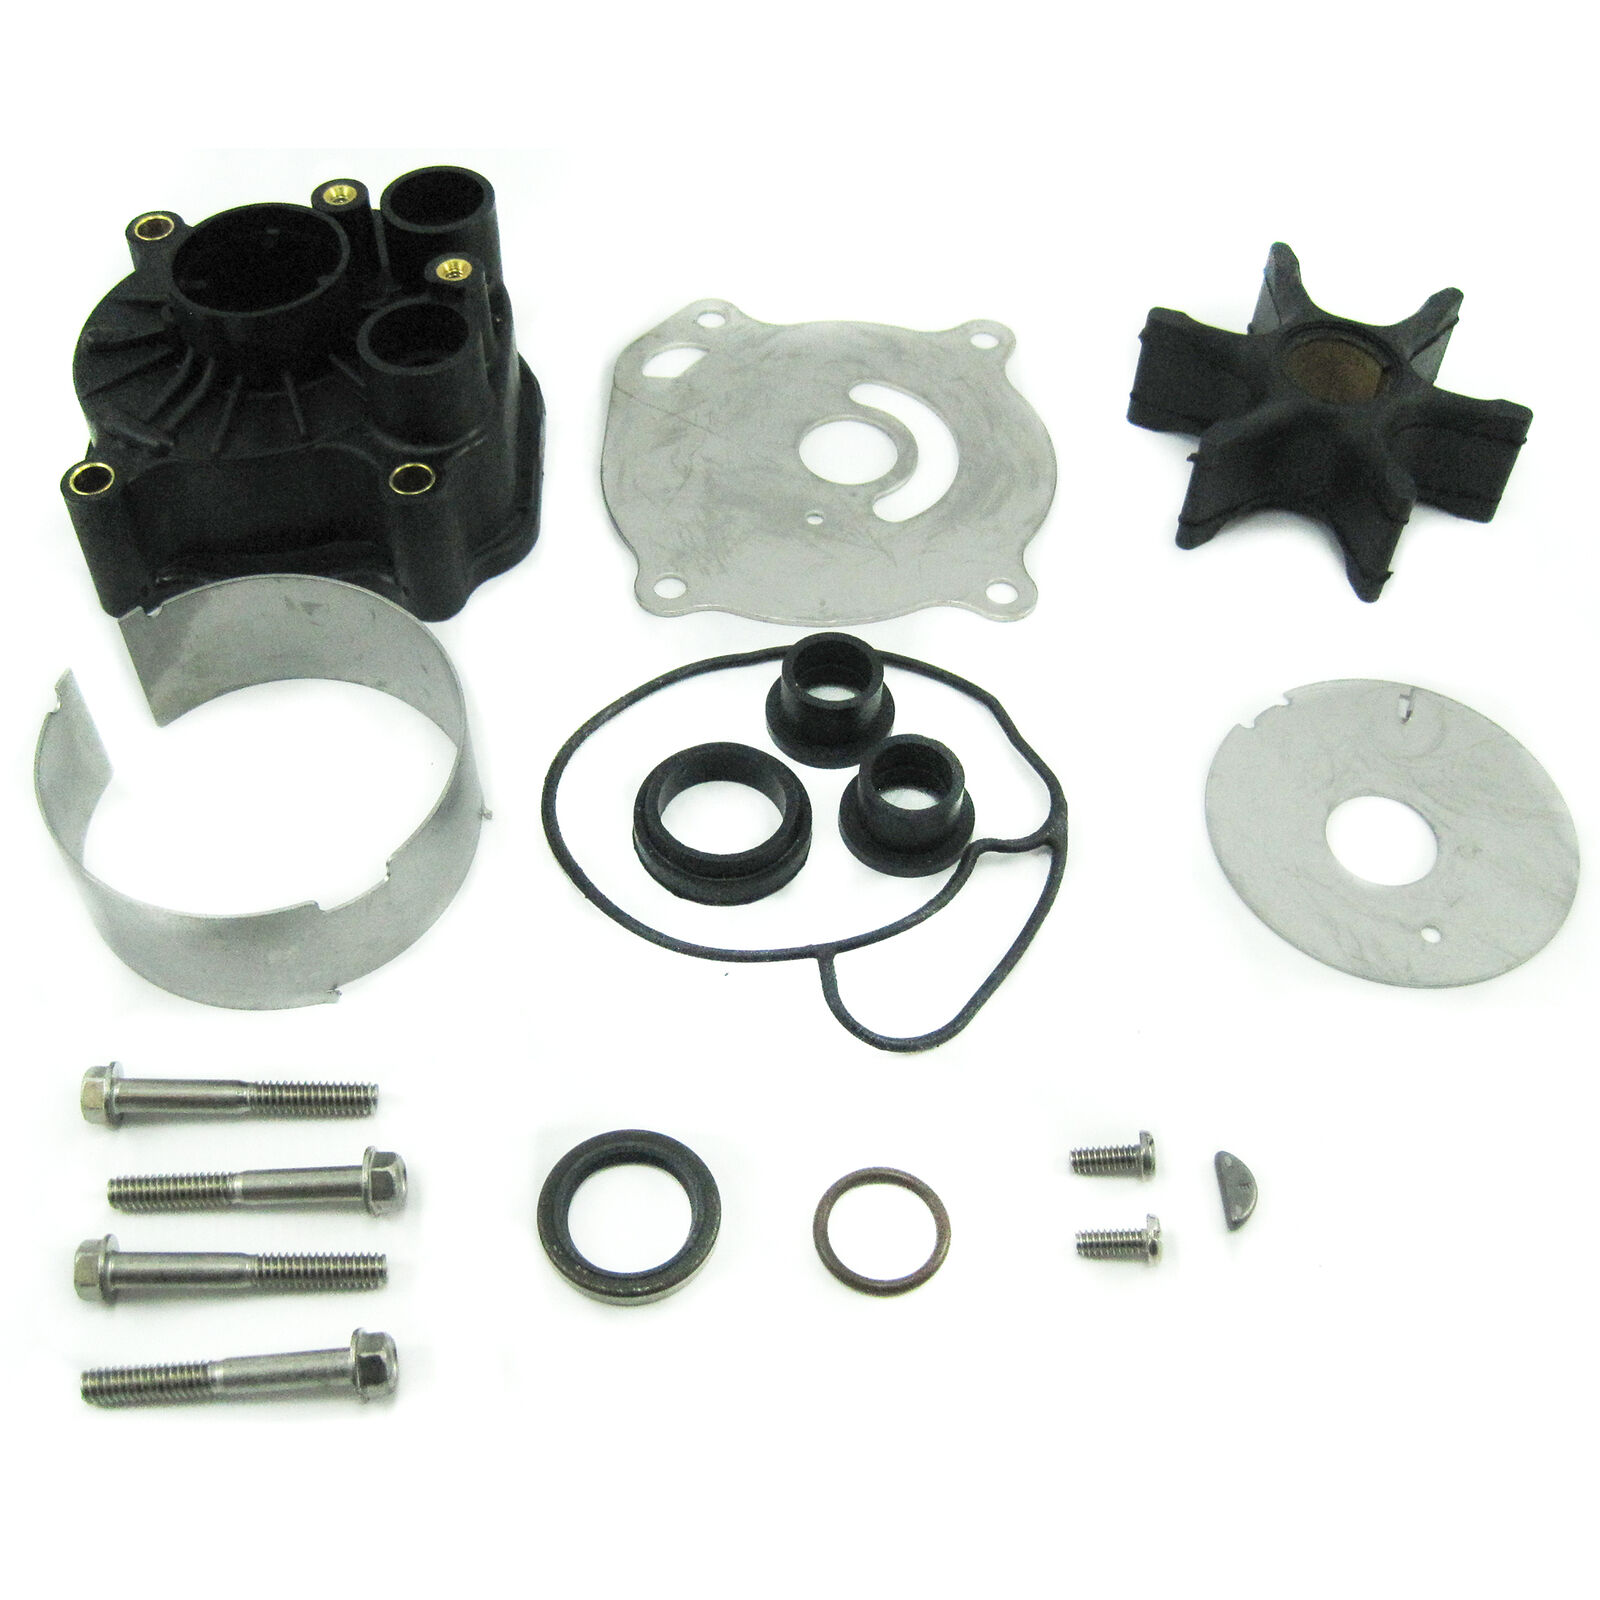 Johnson Evinrude 439140 Water Pump Kit Repair Housing Topics on TV Max 42% OFF with